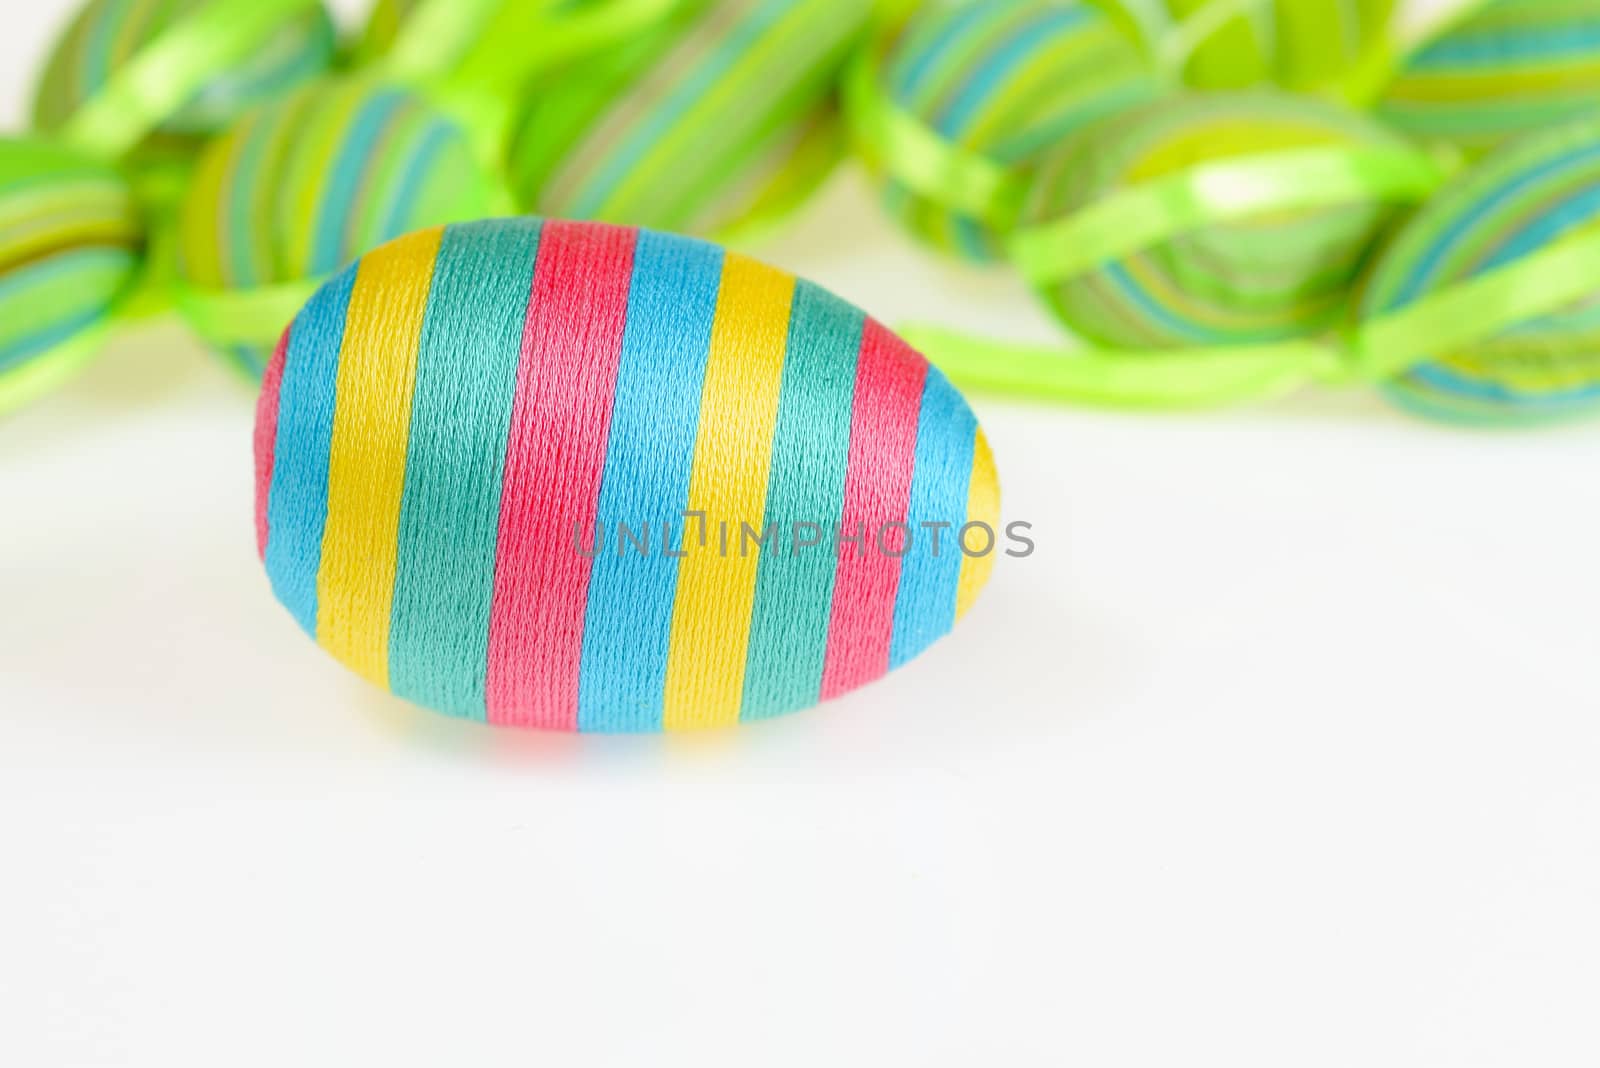 Photo presents Easter decorated striped eggs scatterded on white background.